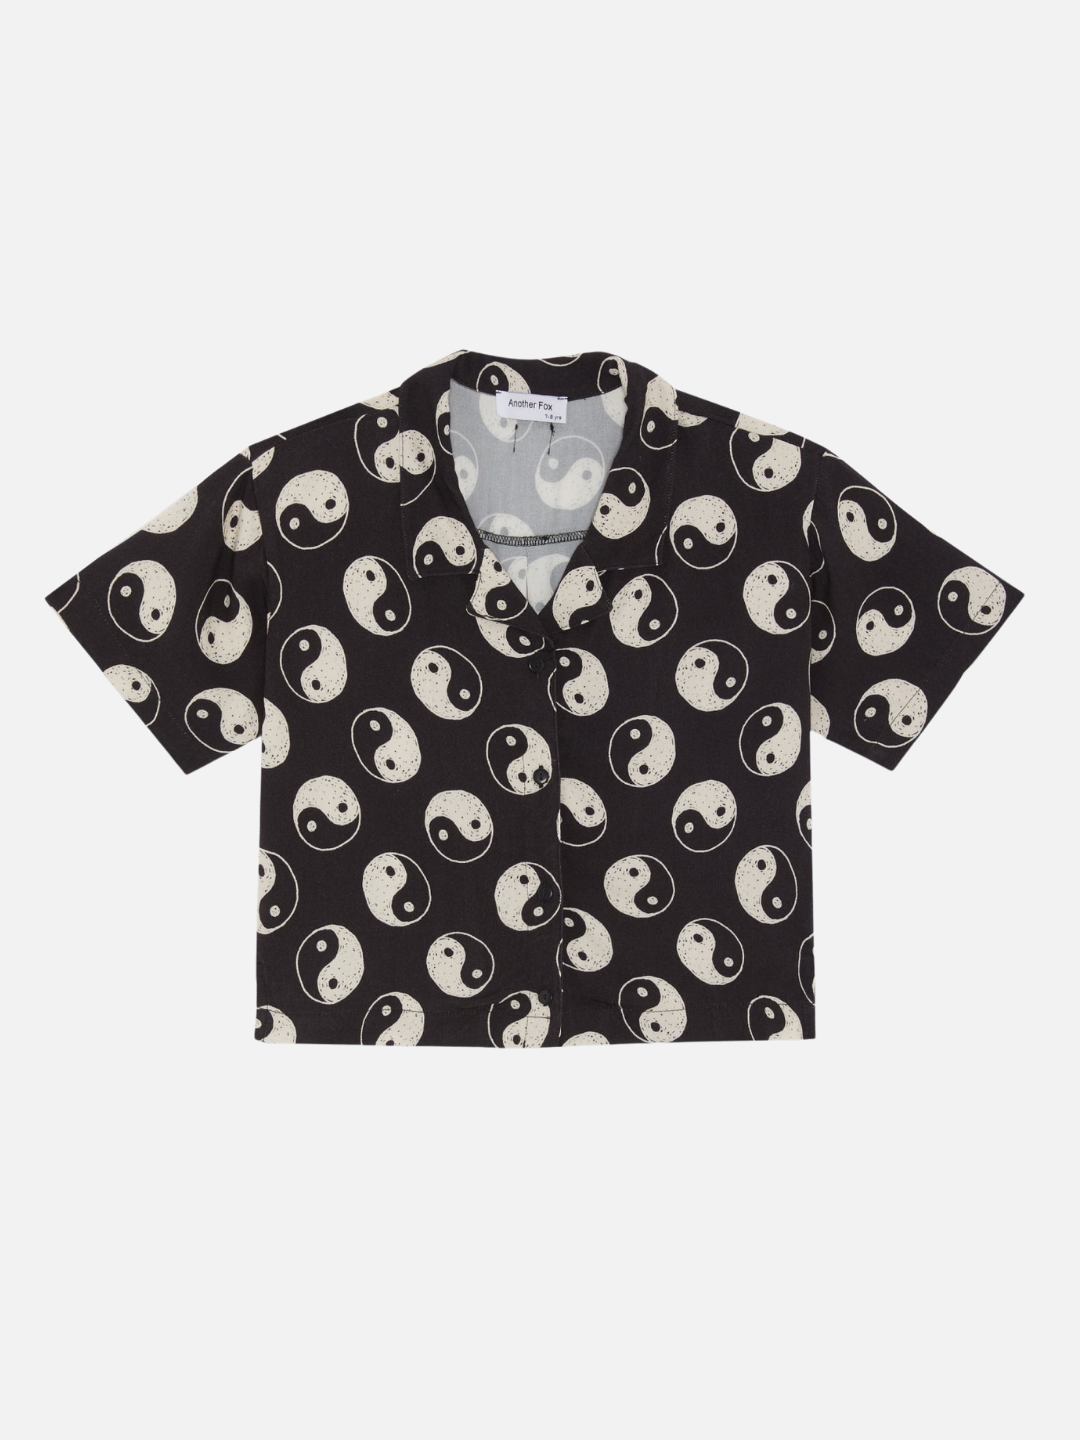 A front view of the black button up shirt with a yin and yang pattern all over.